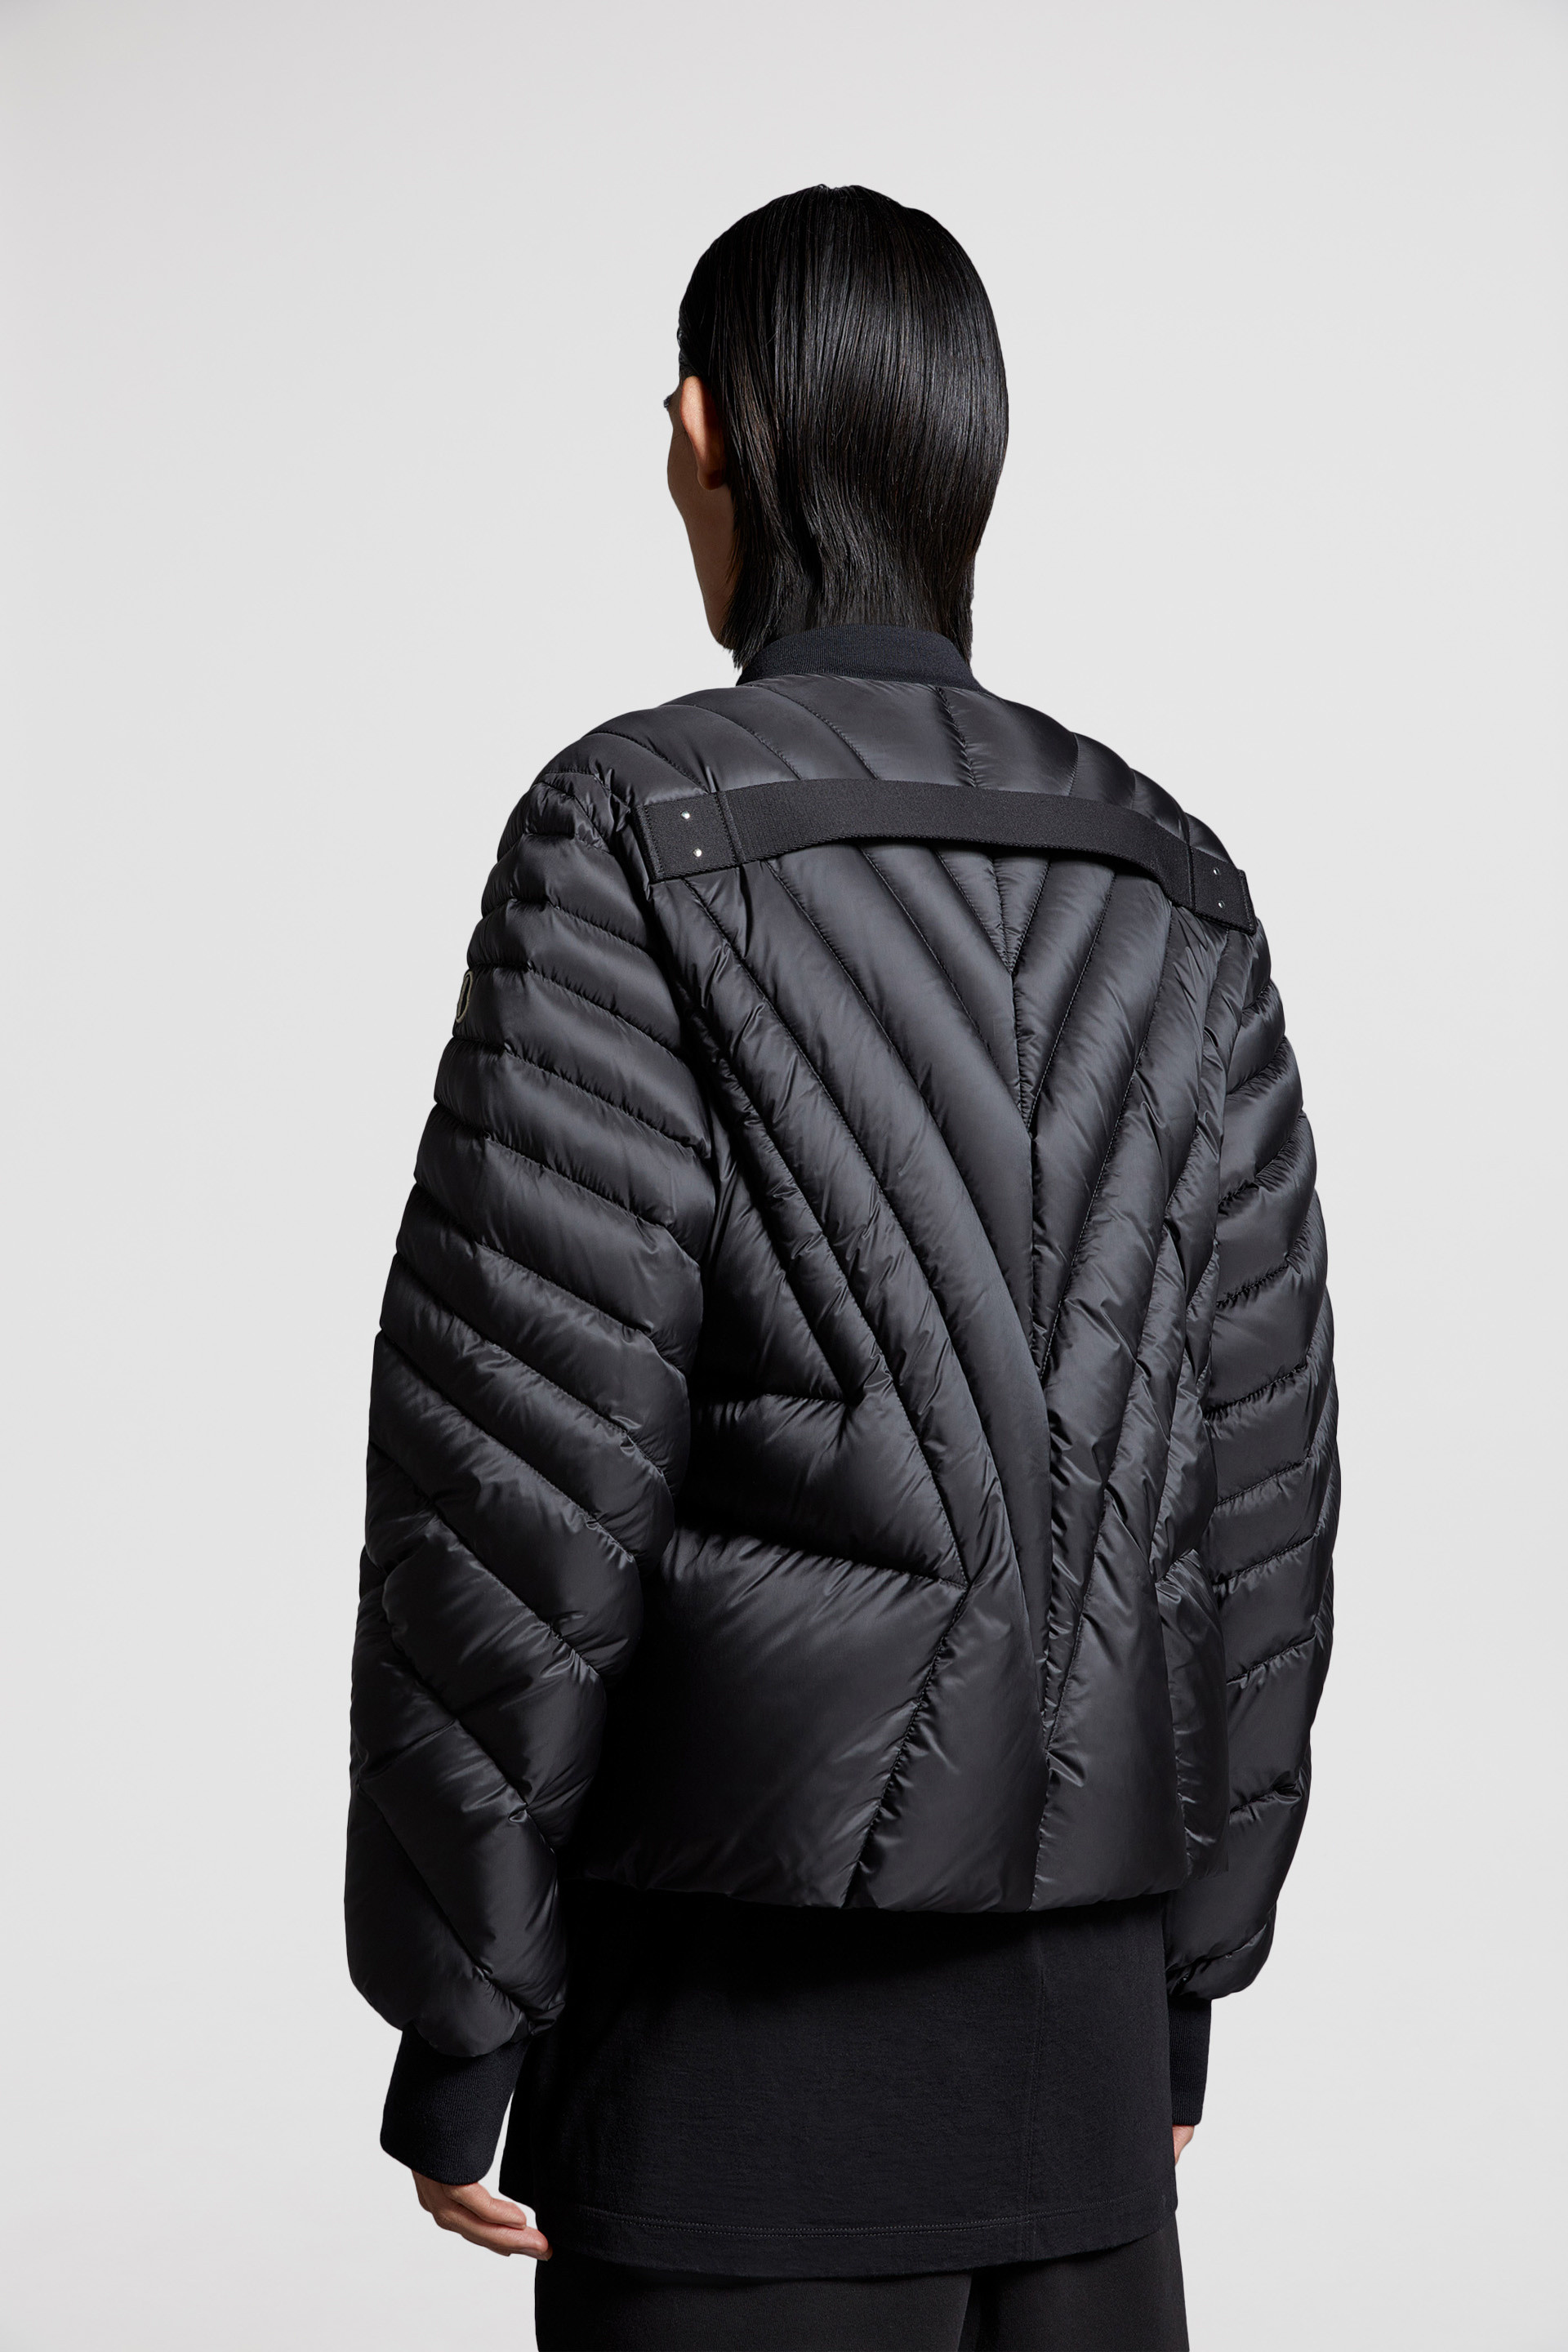 For Special Projects - Moncler + Rick Owens | Moncler US